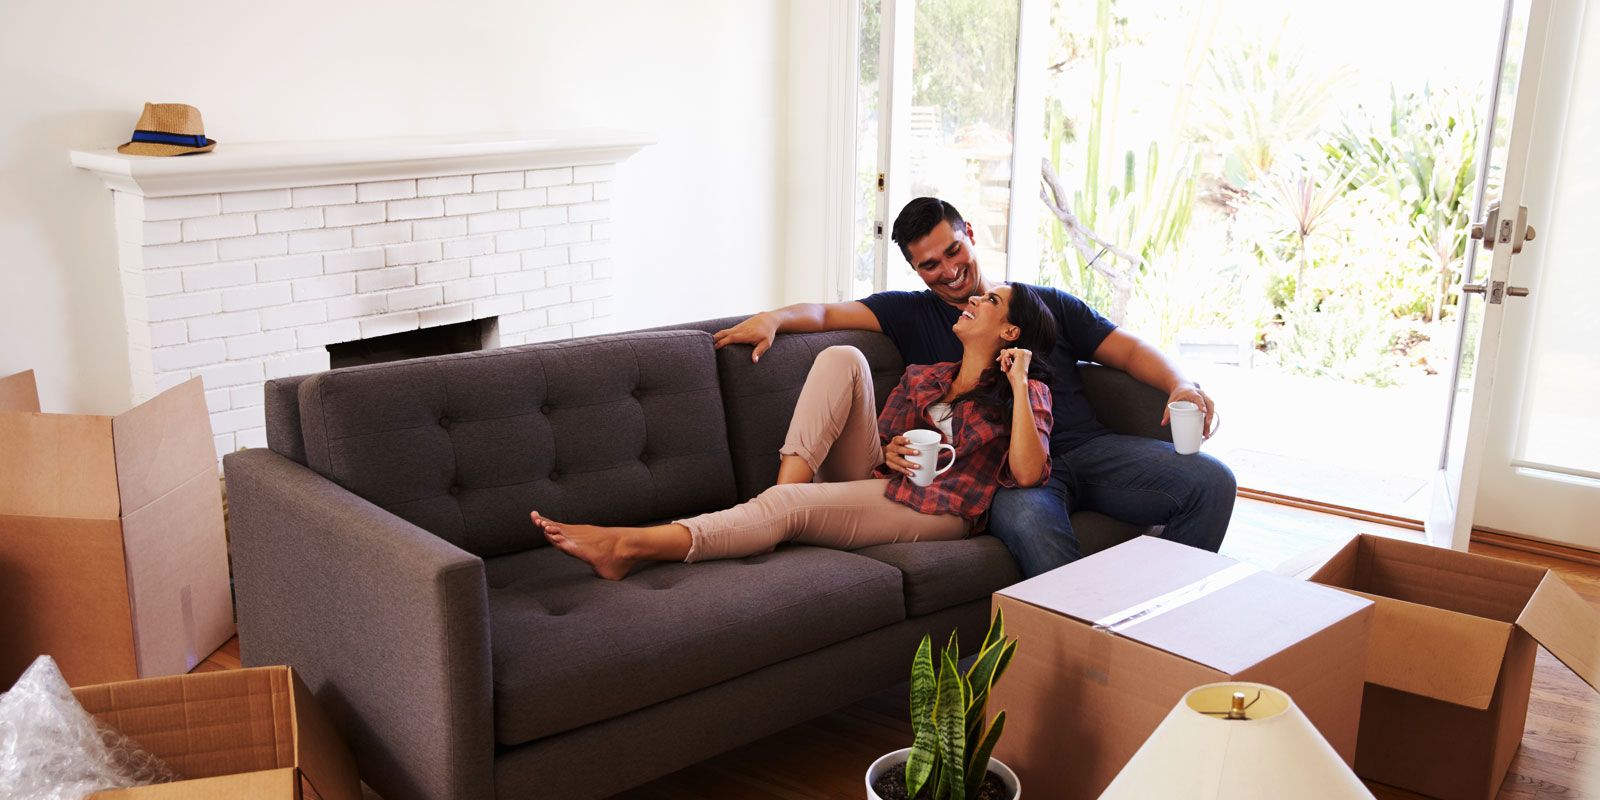 Couple who newly moved in chilling in the living room